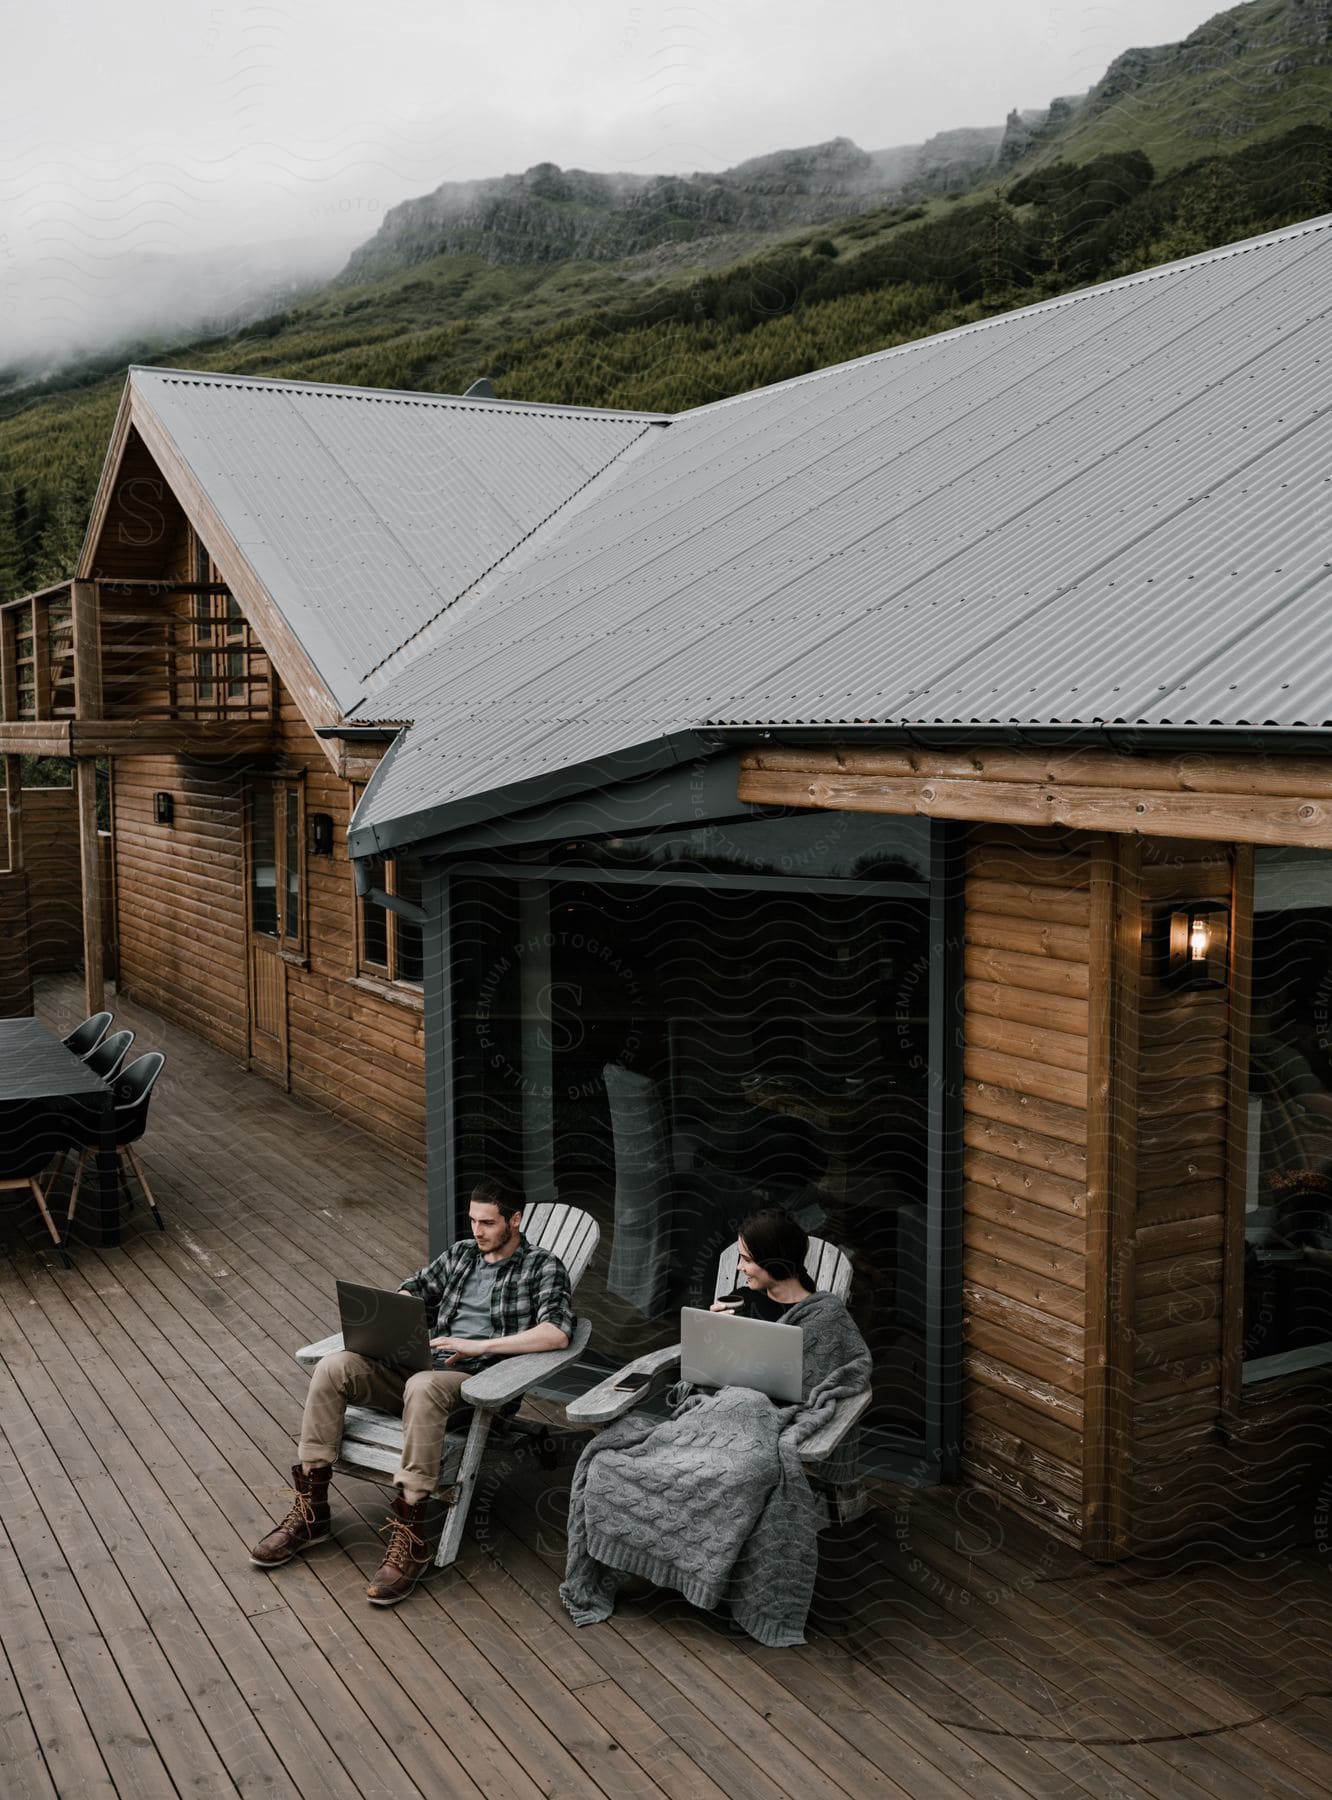 A couple sitting on the deck of a log cabin both holding laptops with fog on the mountain ridge behind them